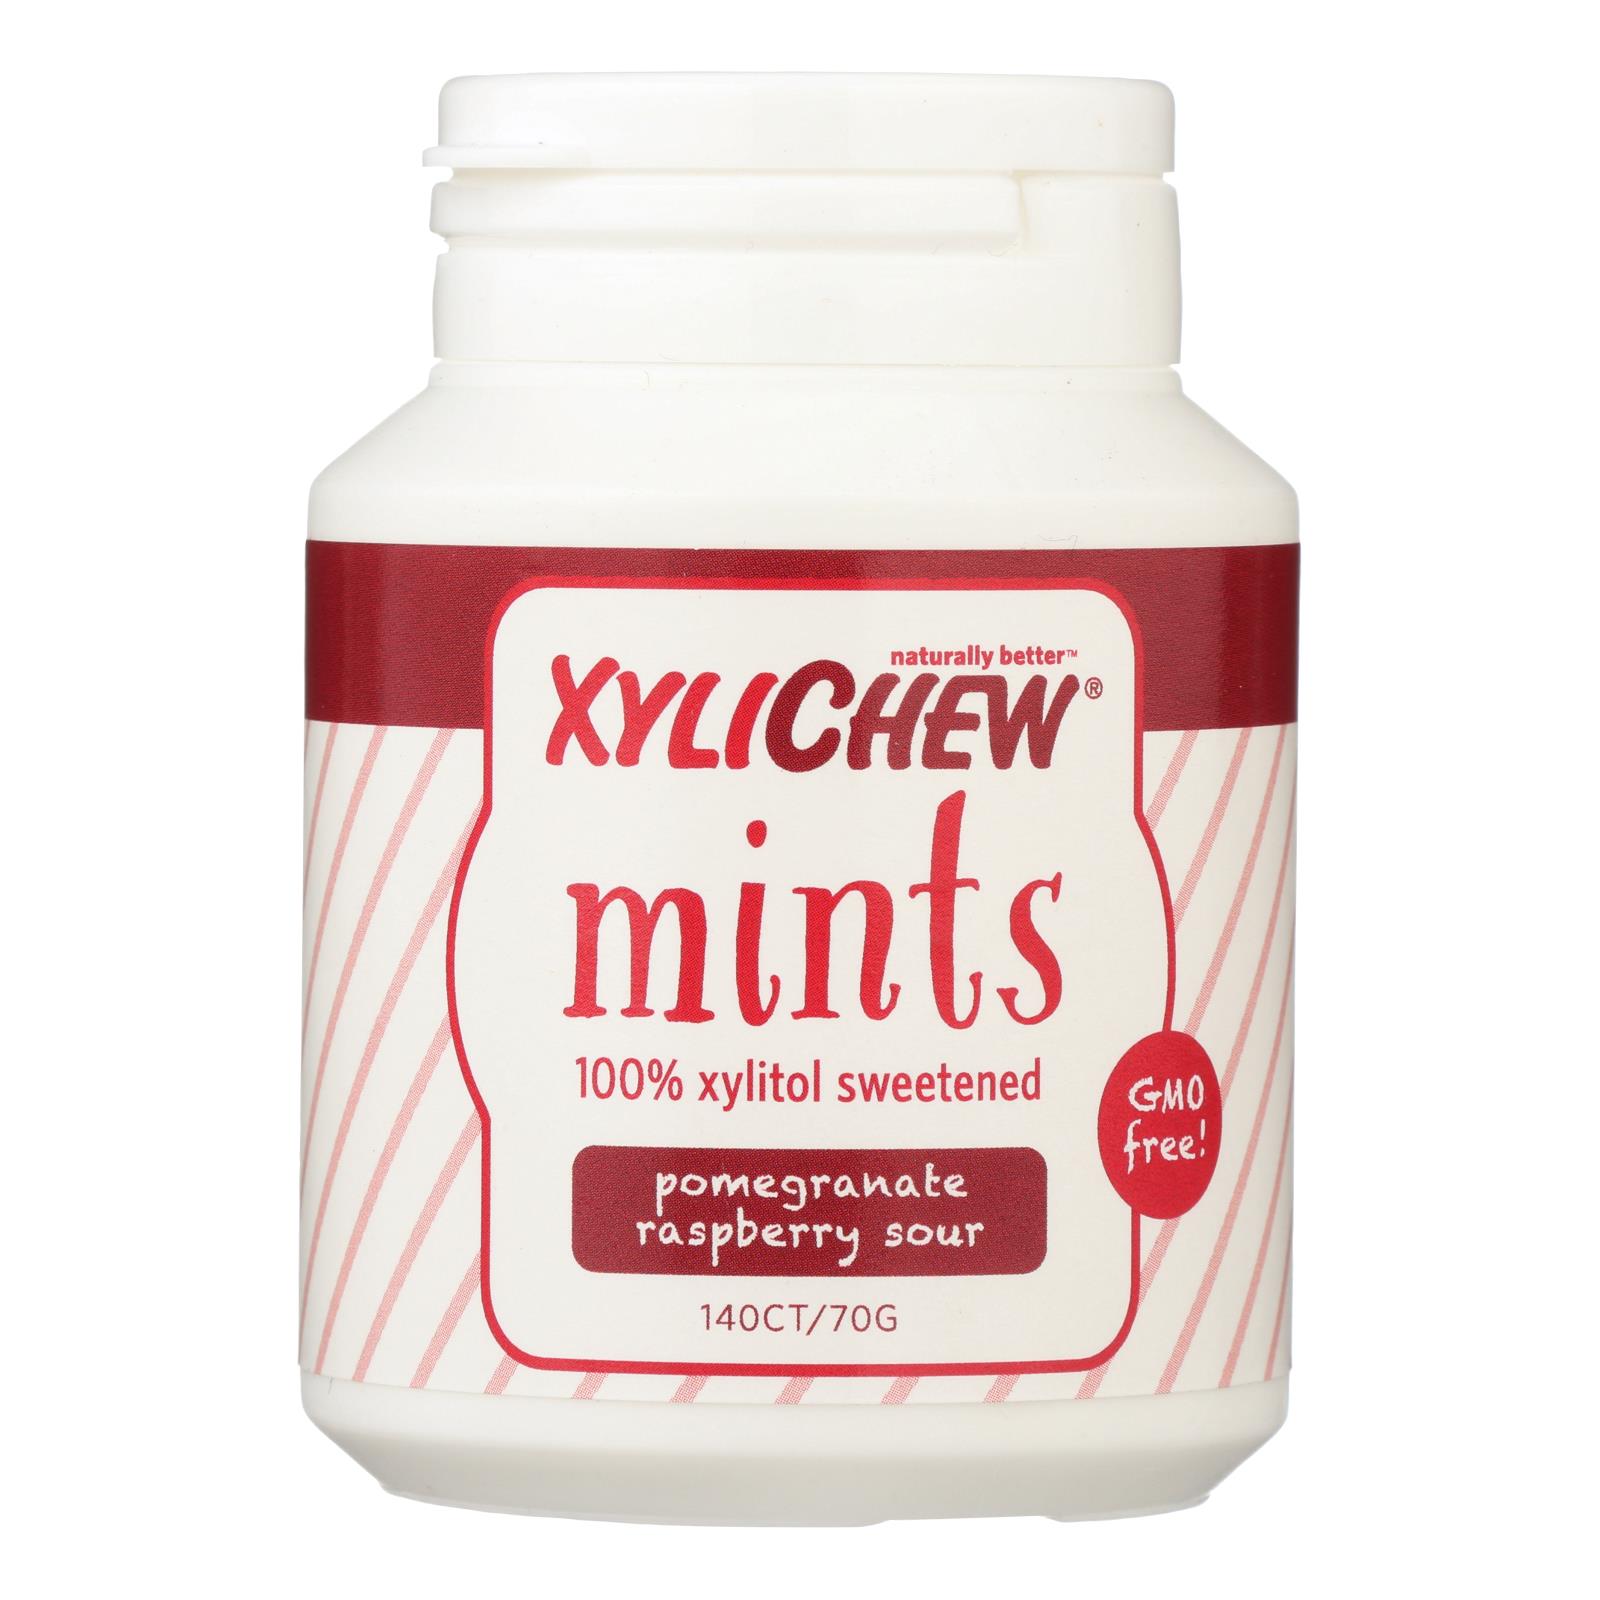 Xylichew Pomegranate Raspberry Sour Mints - Case of 4 - 140 CT